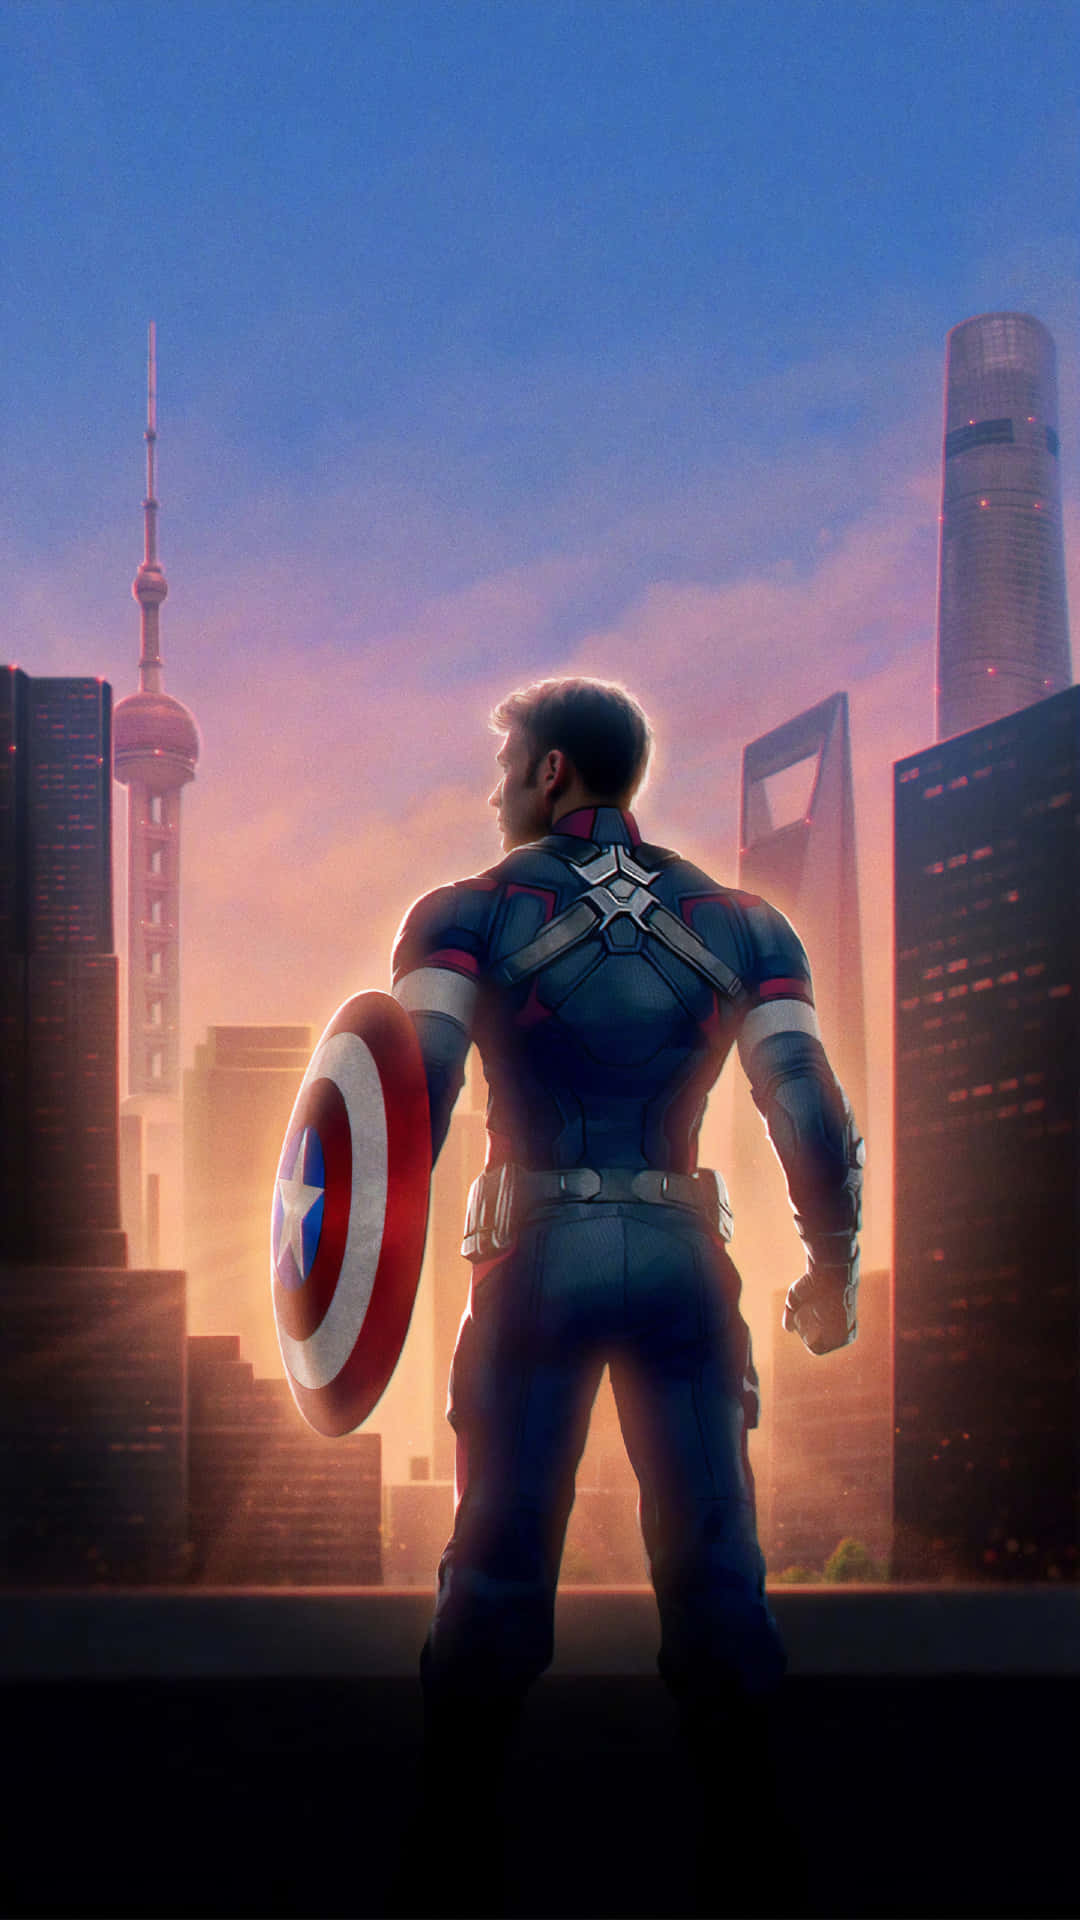 Android Captain America - The ultimate superhero